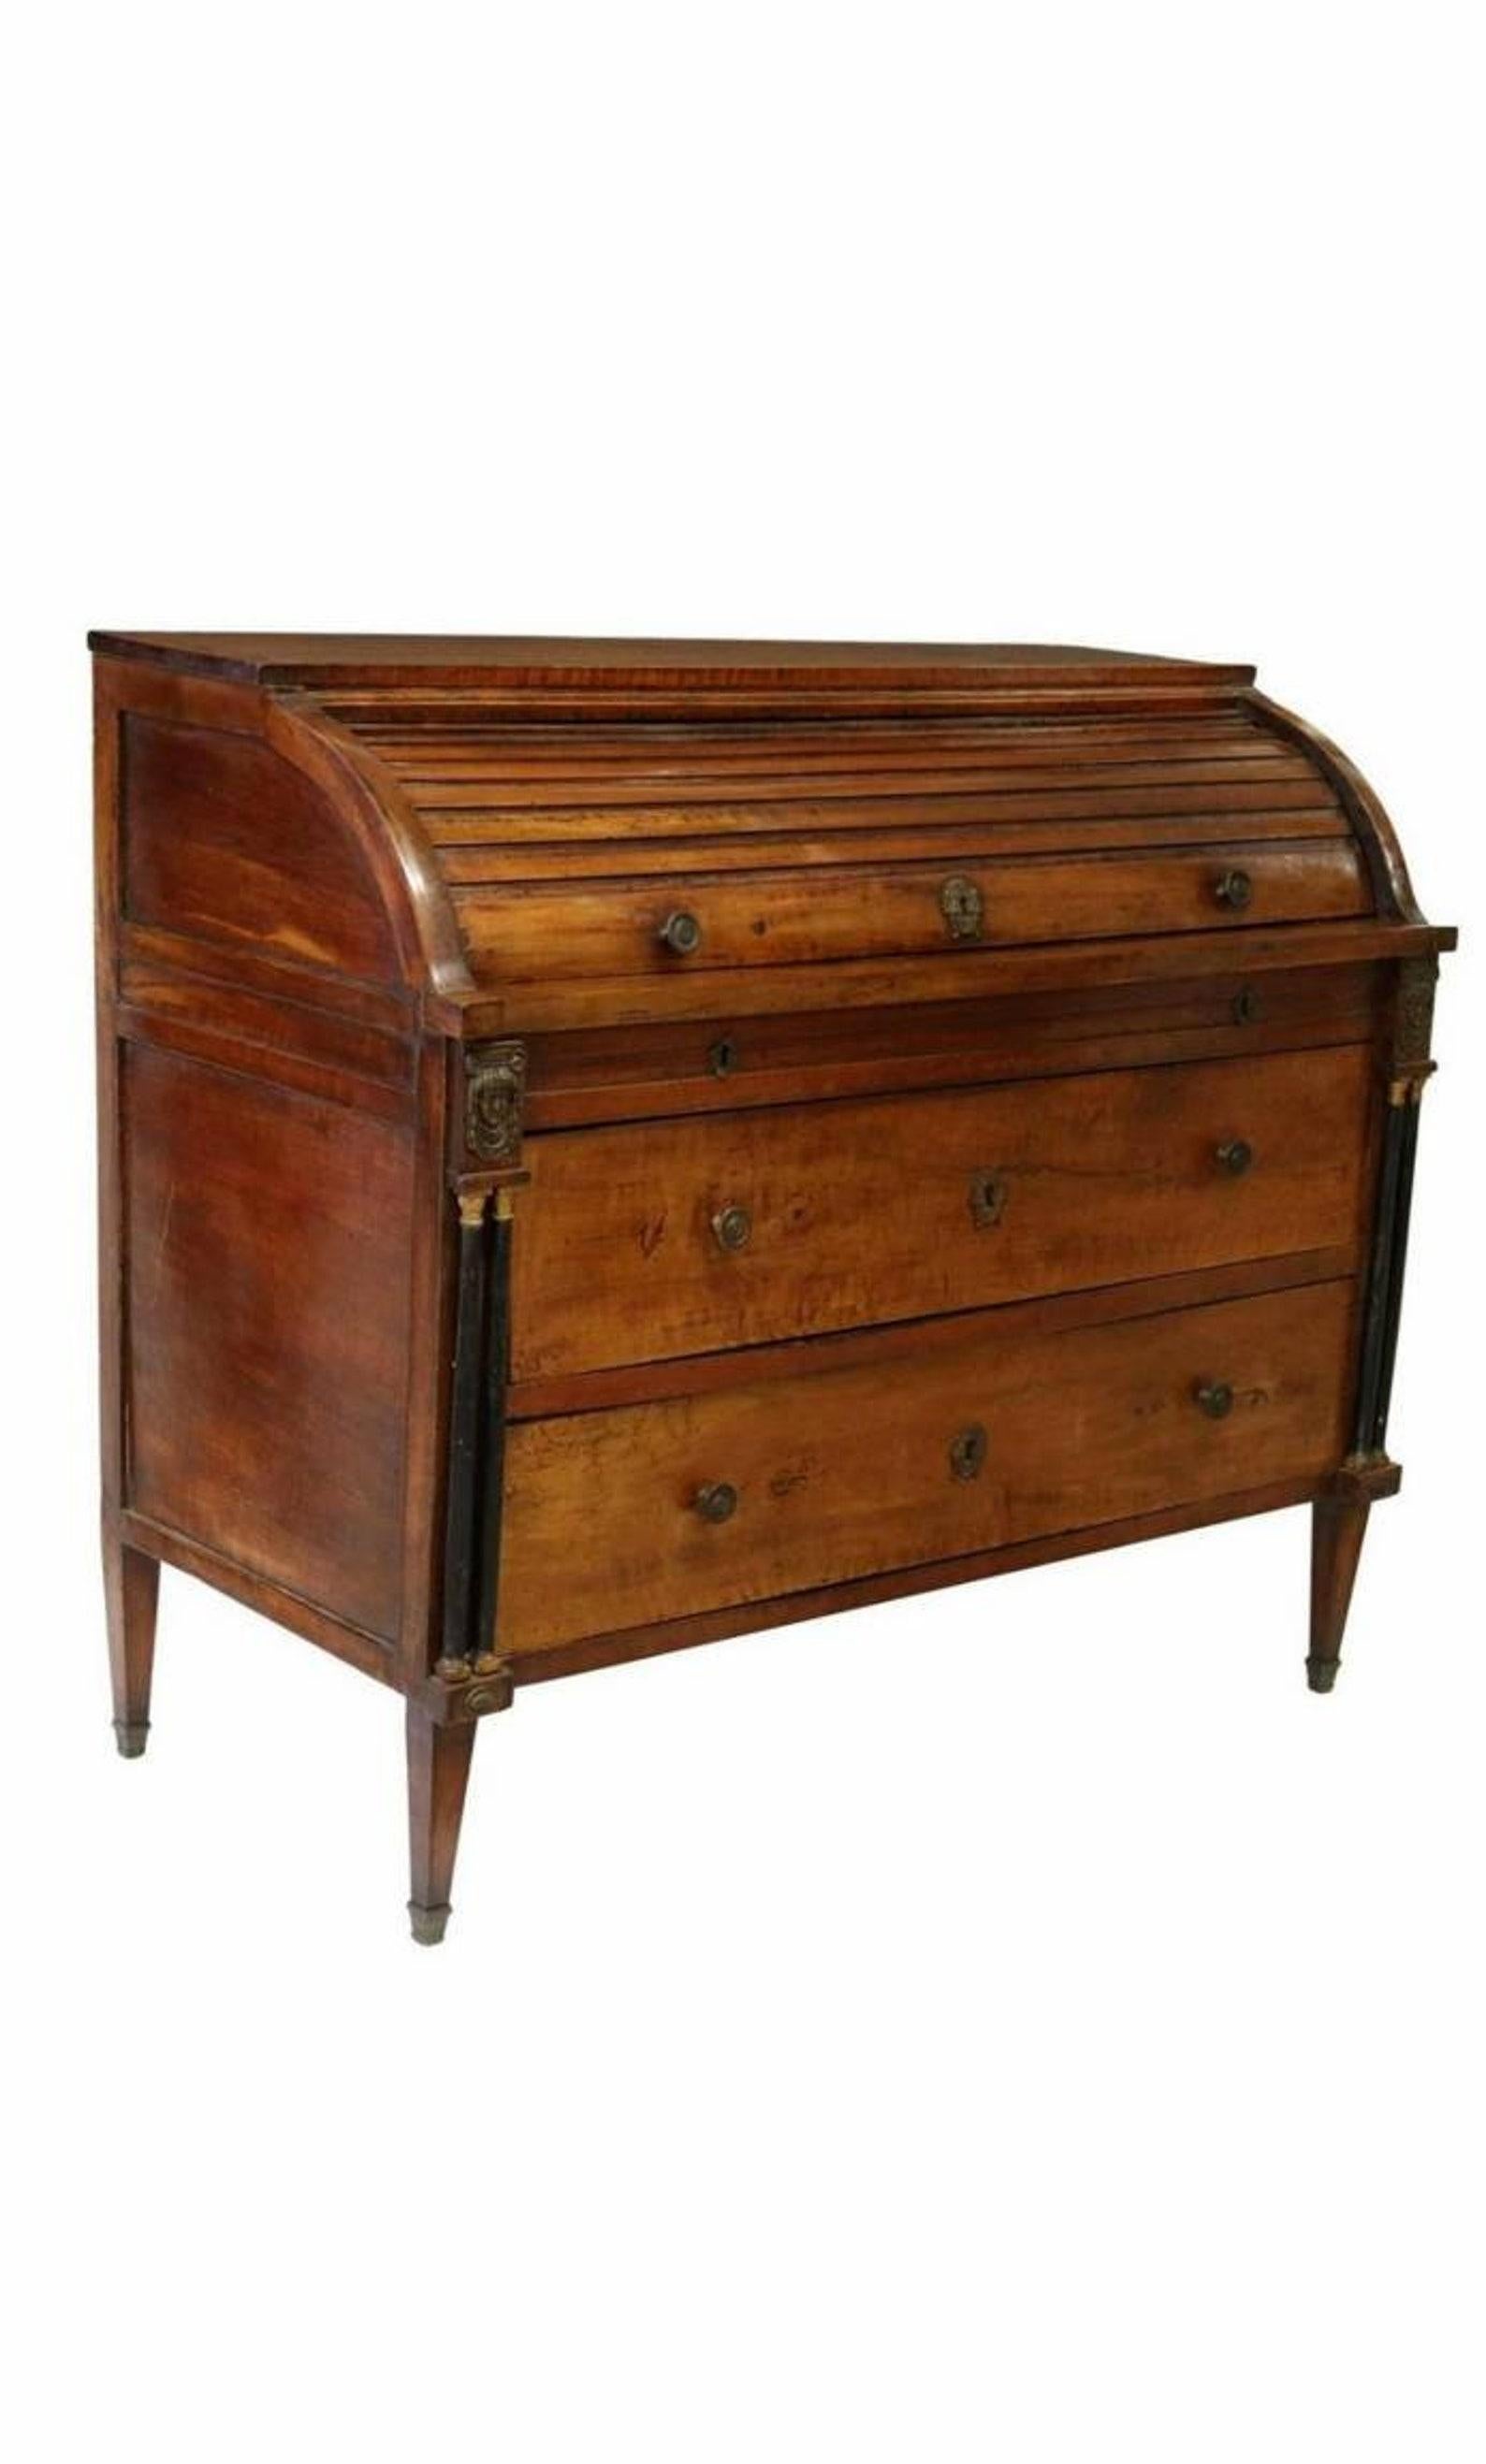 Early 19th Century French Empire Period Bureau a Cylindre Gentleman's Desk For Sale 2